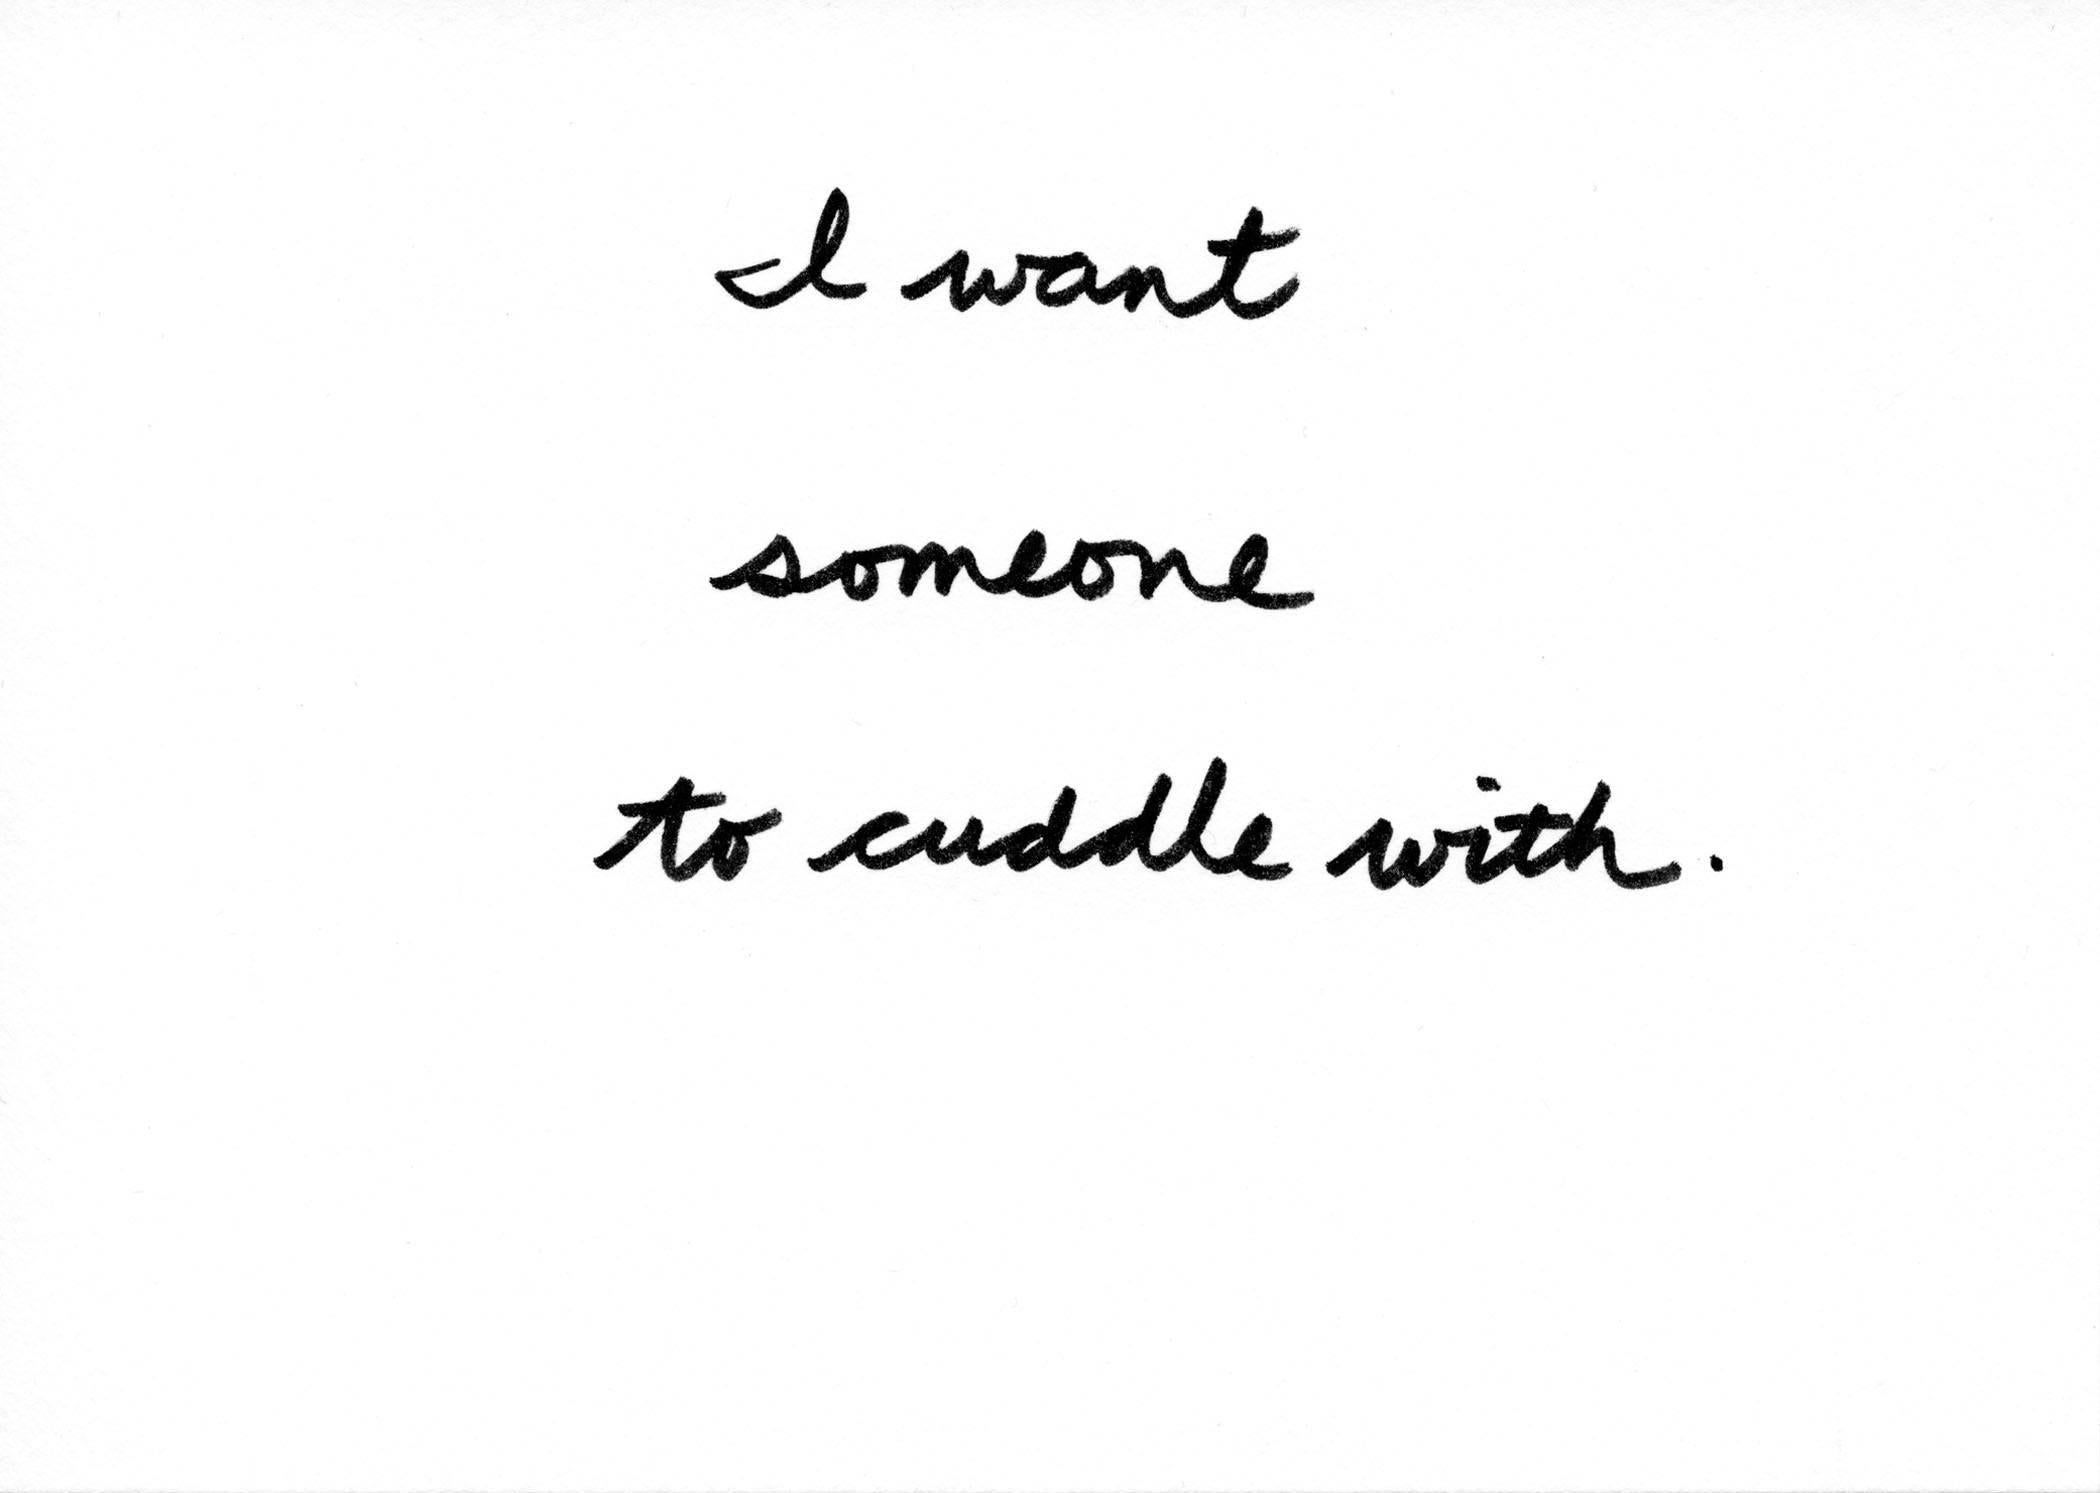 Desire No. 69 (I want someone to cuddle with)